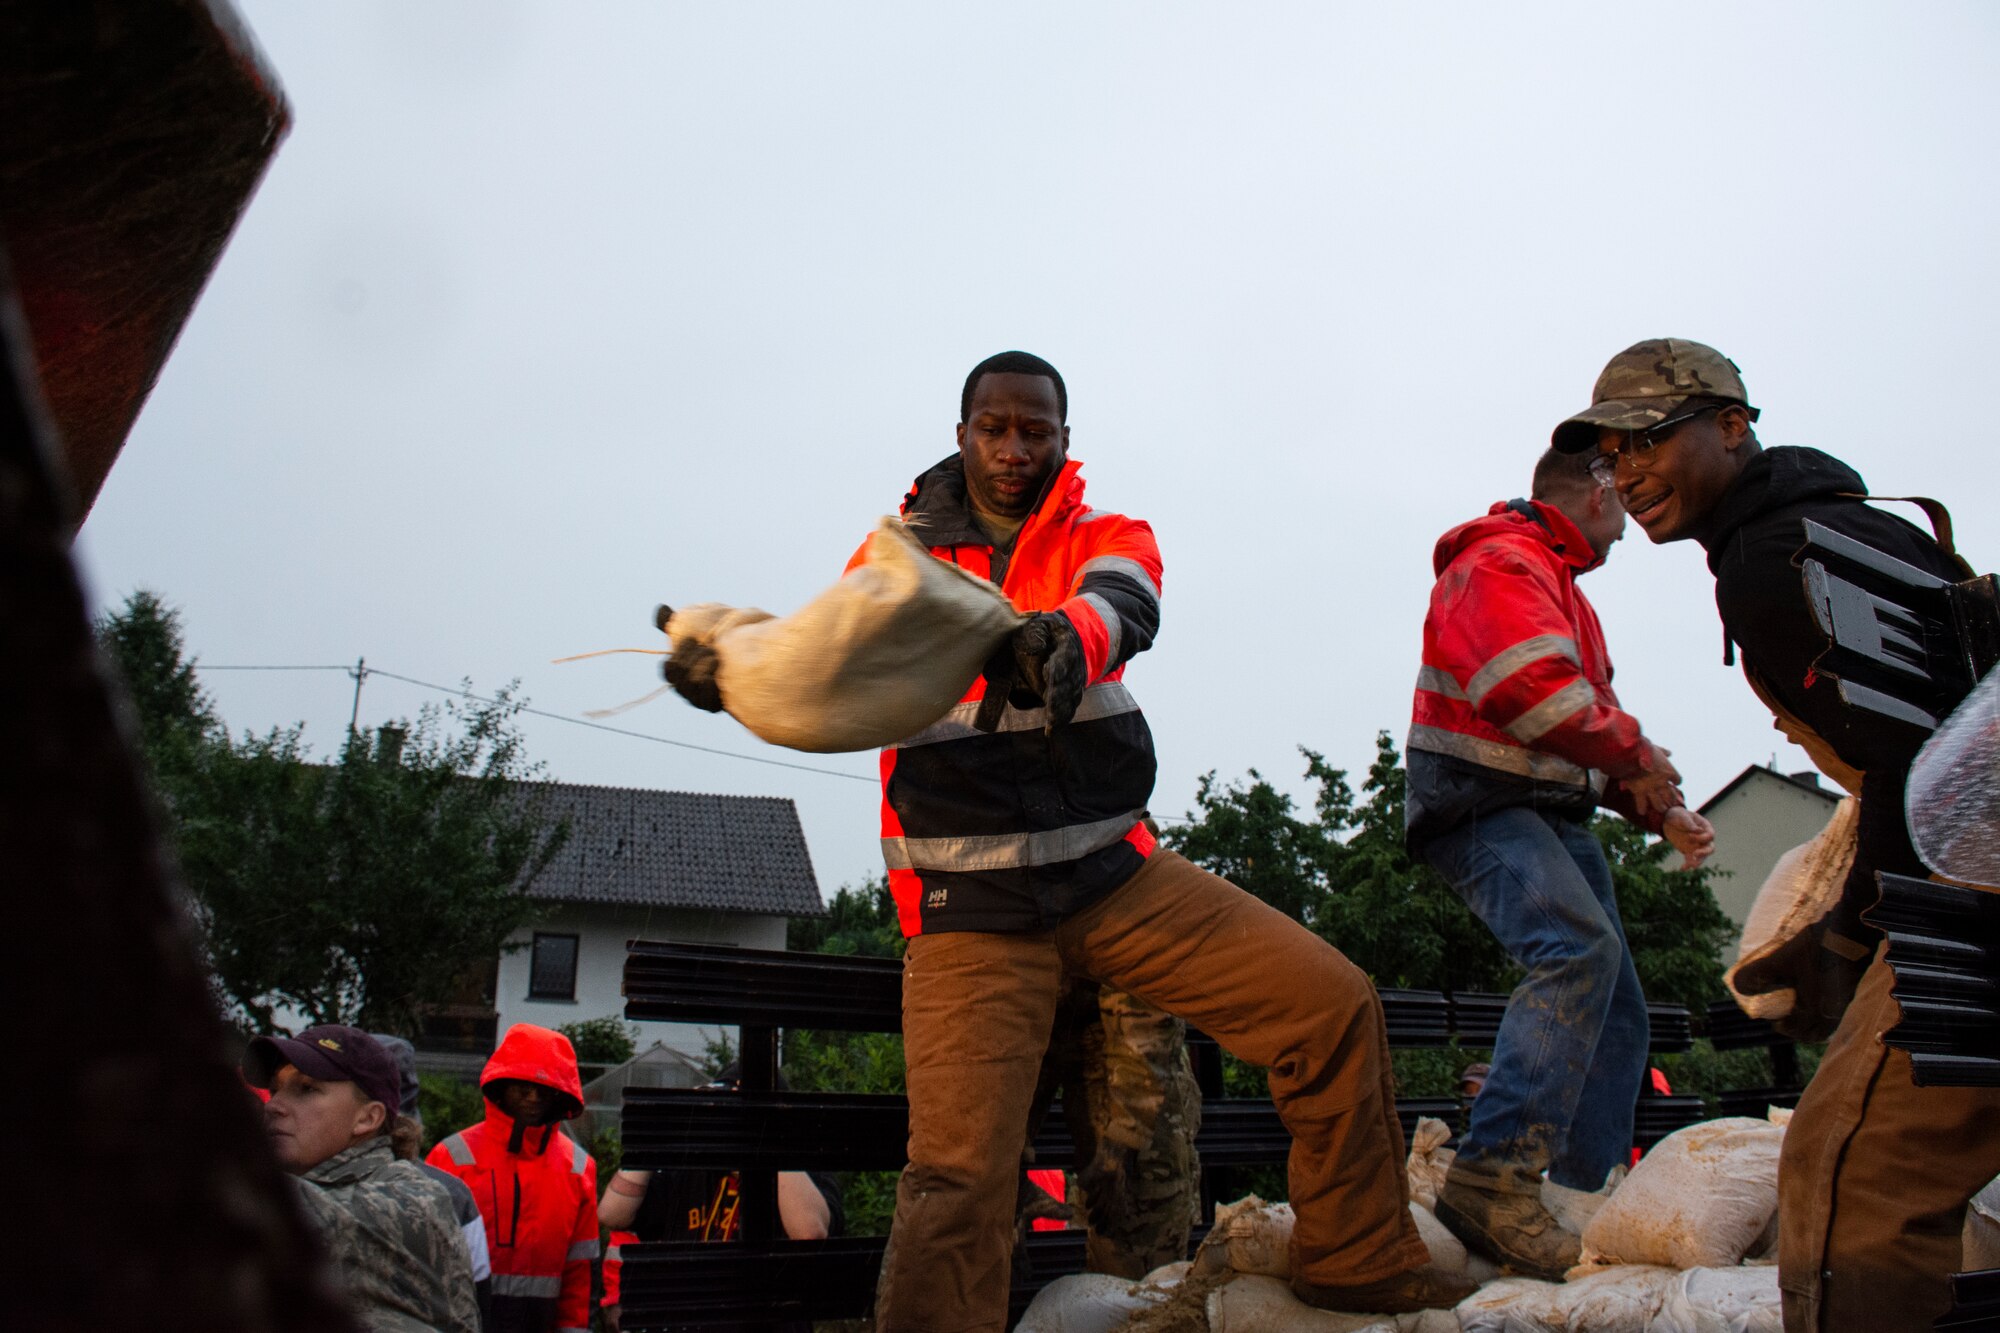 Members from the 52nd Civil Engineer Squadron from Spangdahlem Air Base, Germany, work with German first responders and community members to lay sandbags in the town of Binsfeld, Germany, July 14, 2021.